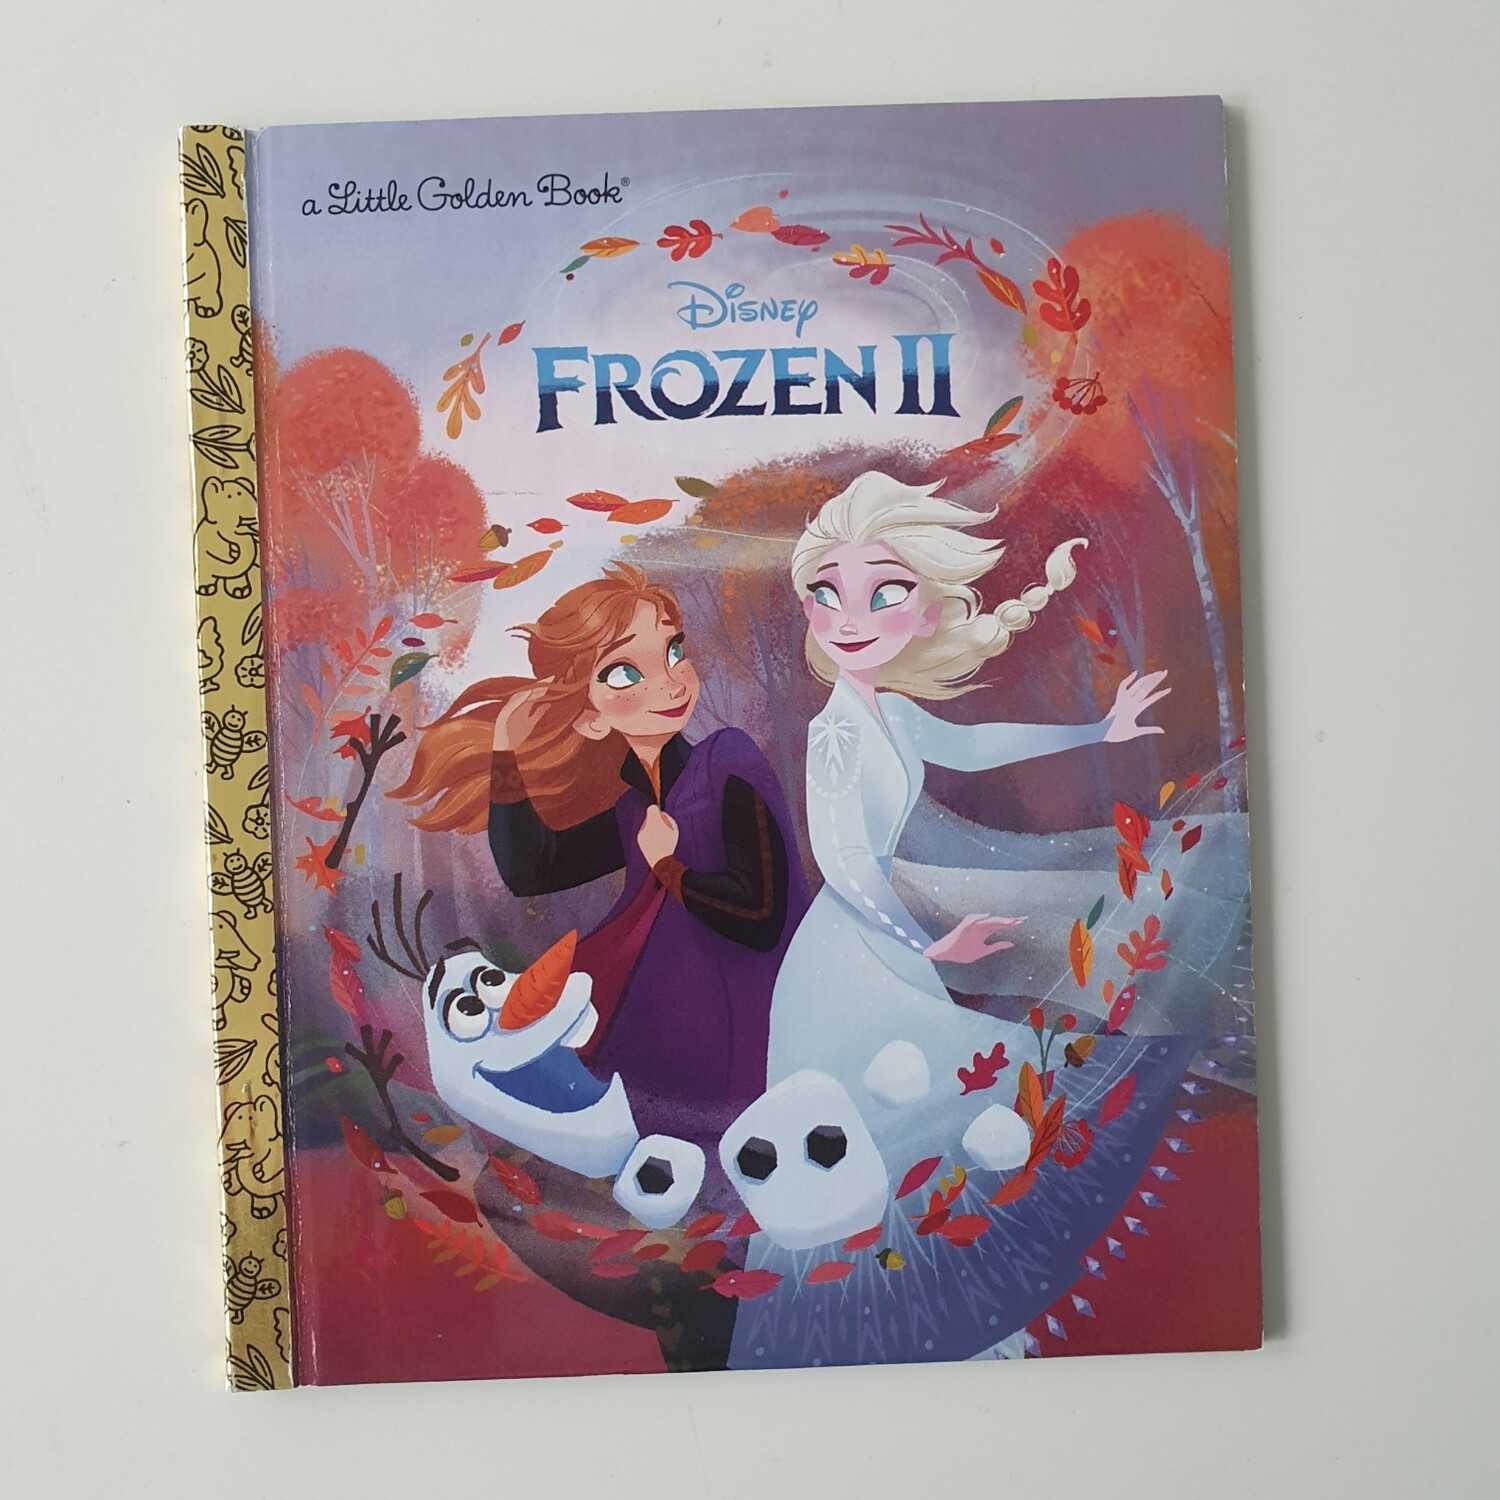 Frozen 2 Notebook - board book will come with metal book corners included